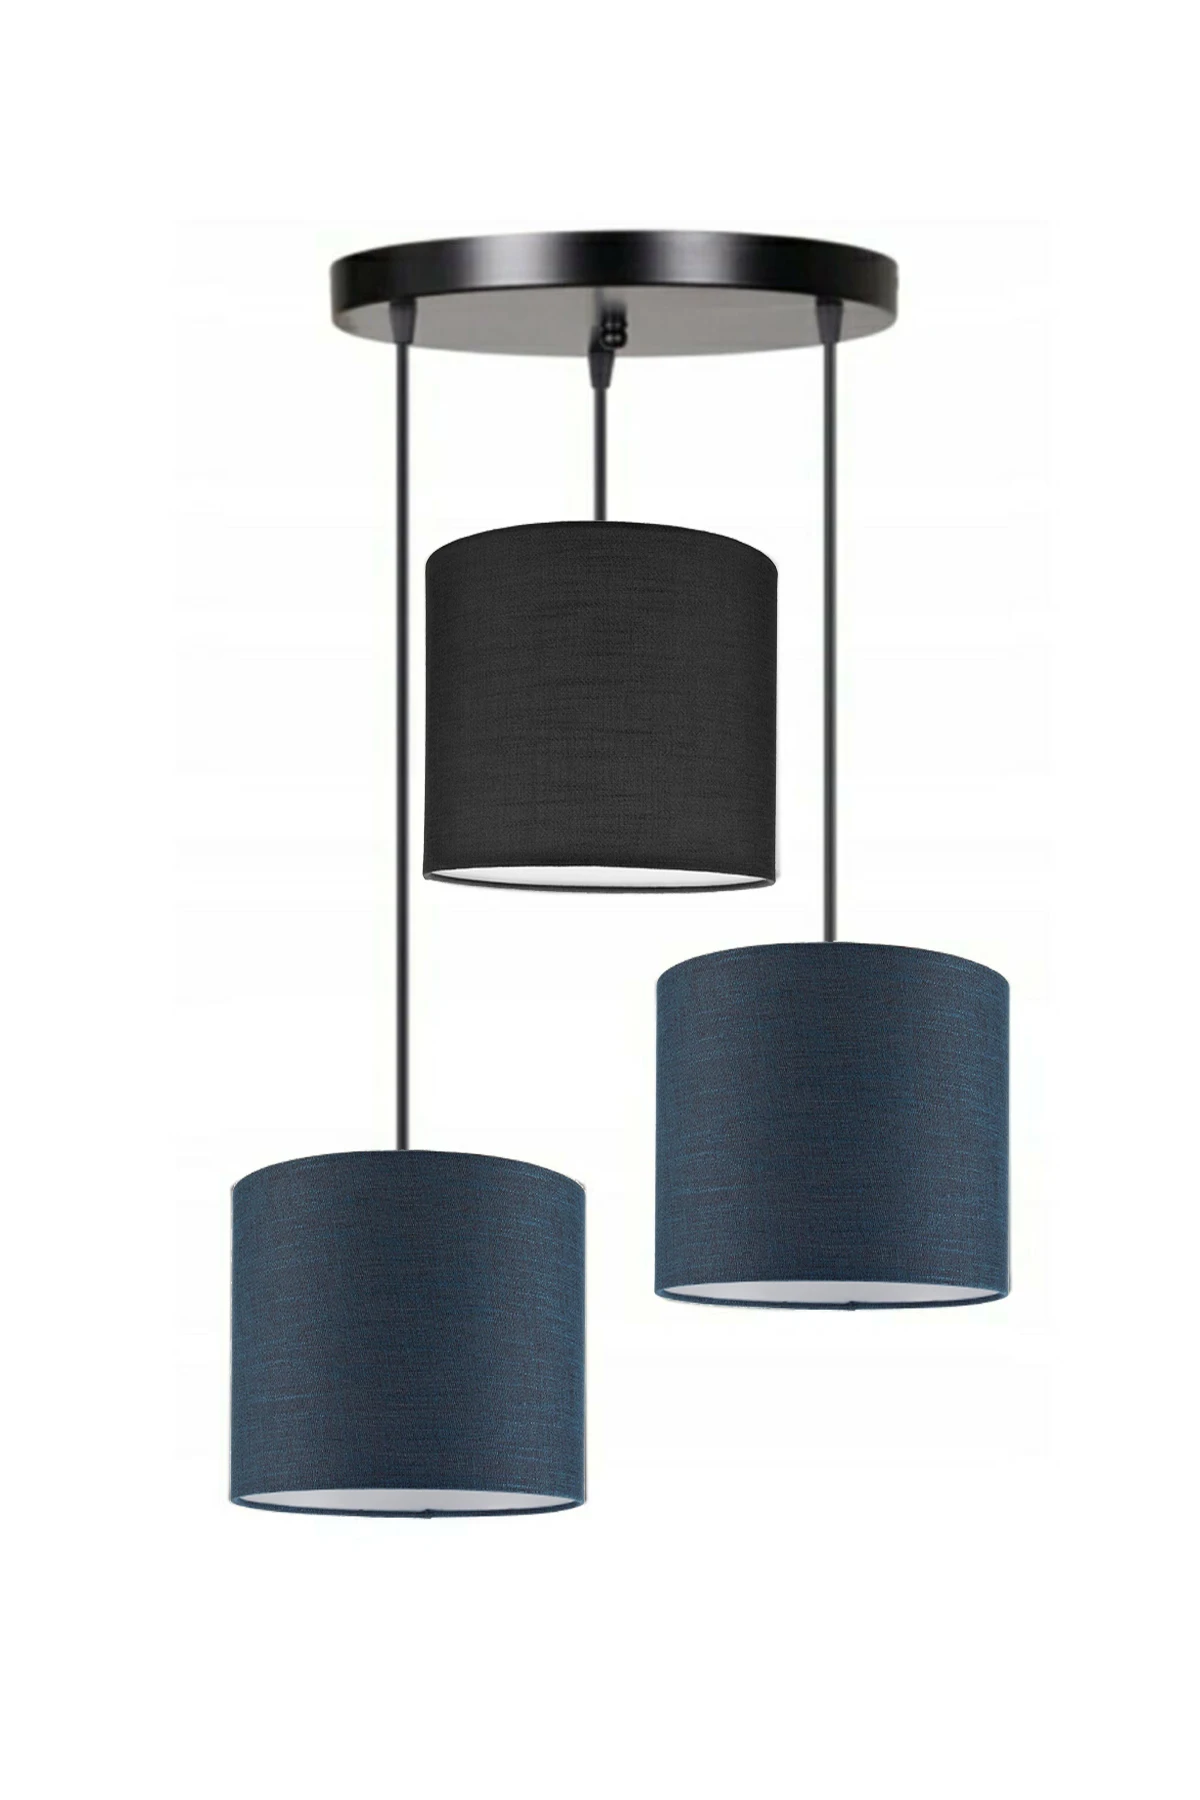 3 Heads 2 Navy Blue 1 Black Cylinder Fabric Lampshade Pendant Lamp Chandelier Modern Decorative Design For Home Hotel Office